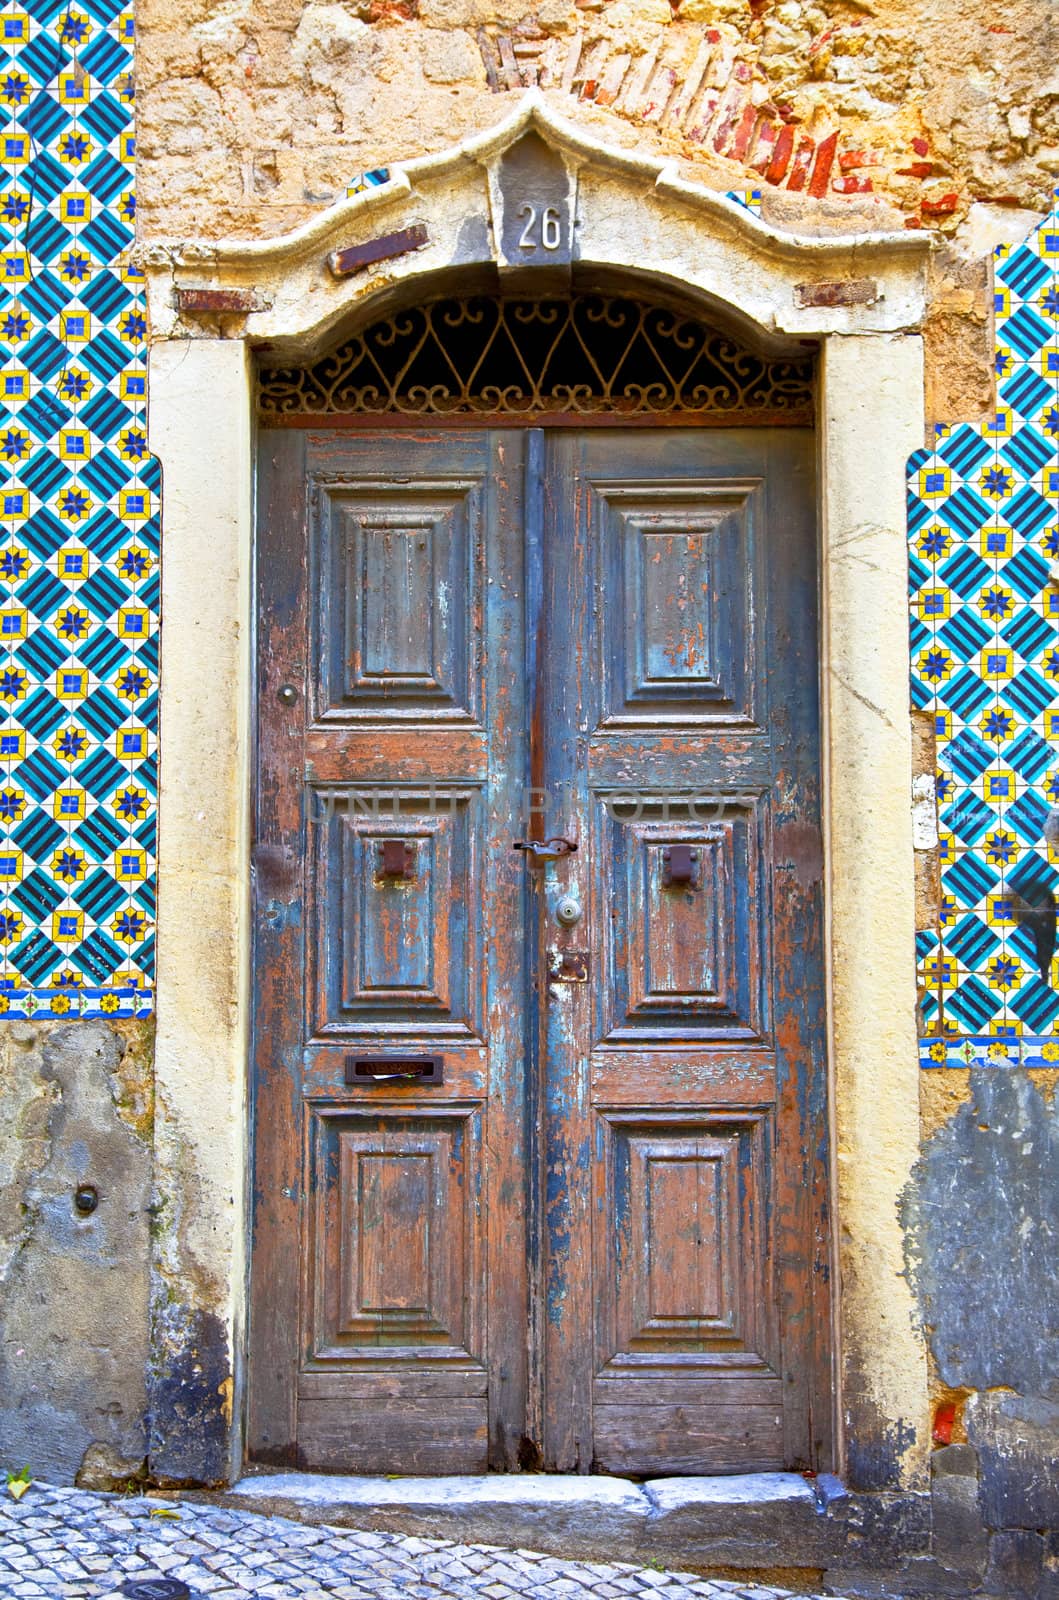 Old wooden door in Portugal. Wall of traditional Portuguese tiles